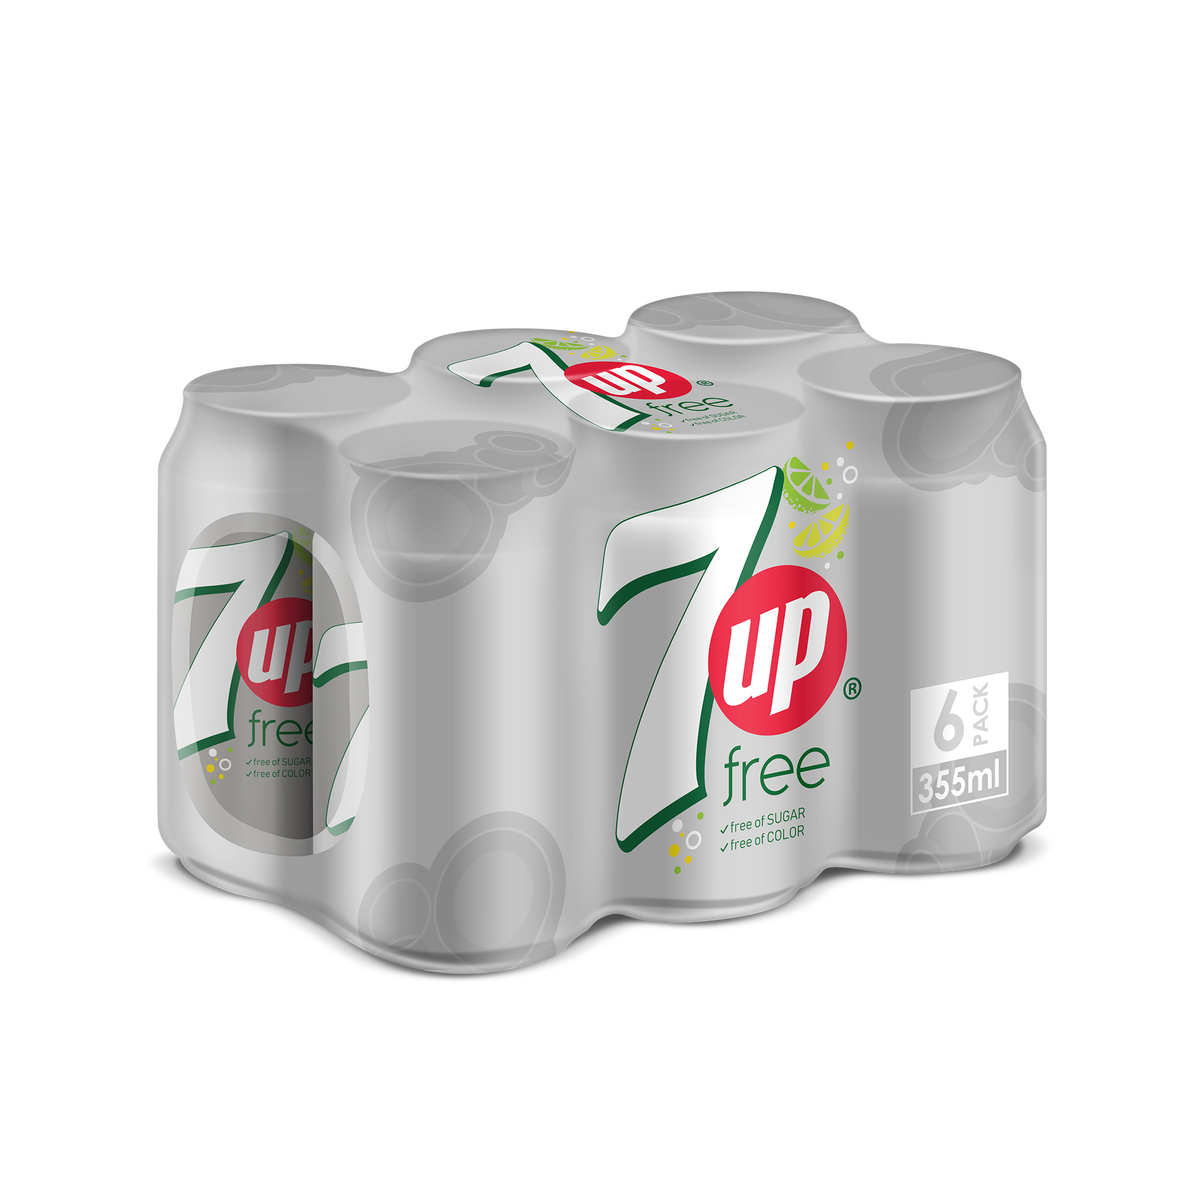 7UP Free Carbonated Soft Drink Can 6 x 355 ml